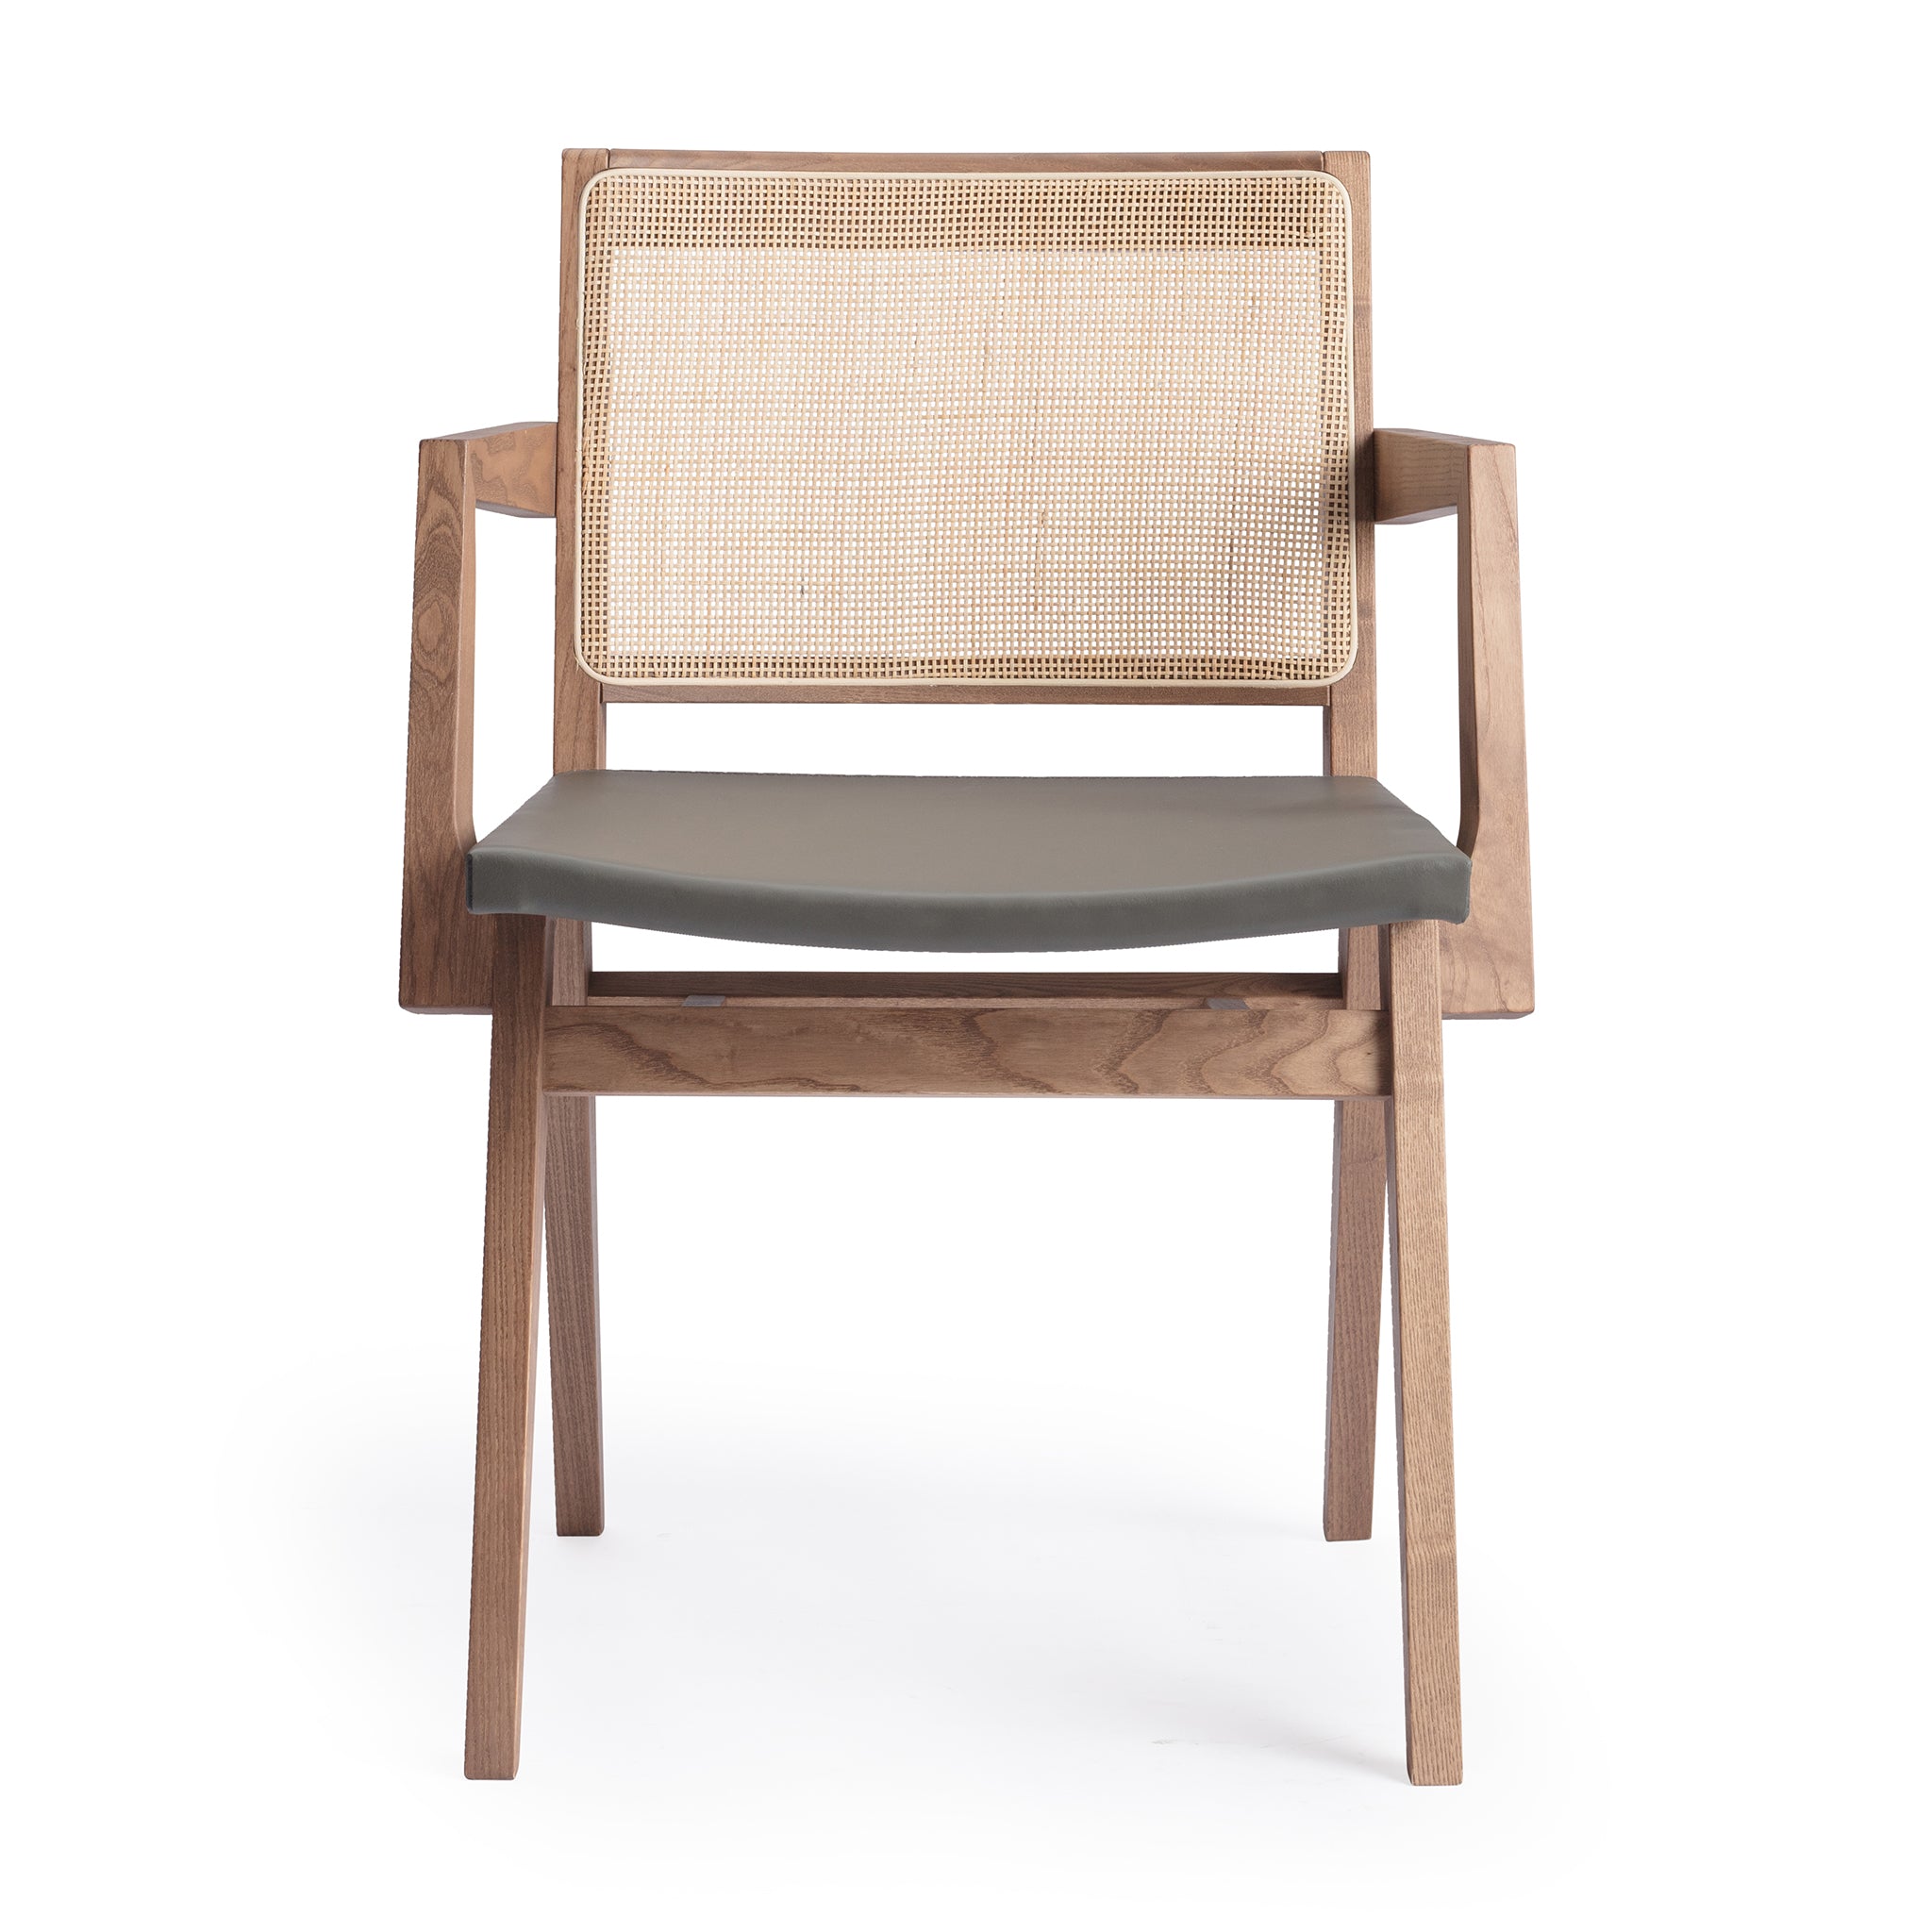 Front view of an "Elye" designer dining chair, walnut stained ash frame, square weave cane back, contract grade off white leather seat, produced by Klarel in Italy. #K40-2